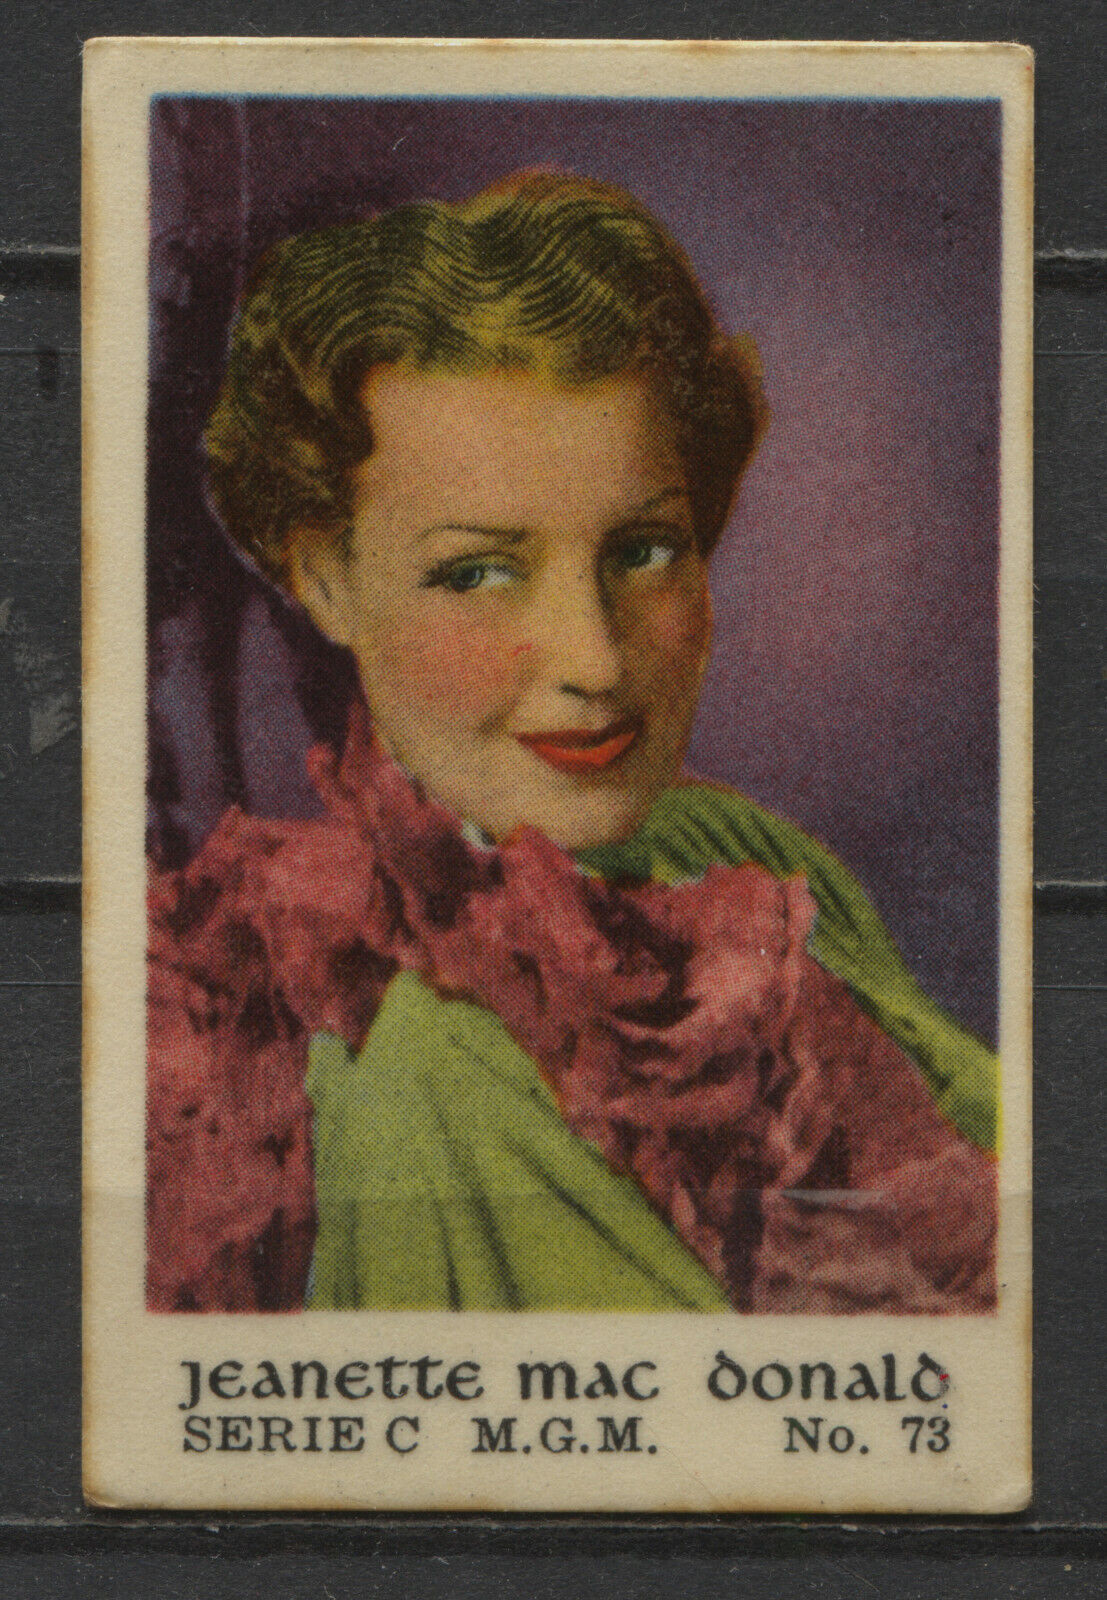 Jeanette Mac Donald Vintage Movie Film Star Trading Card No. C-73